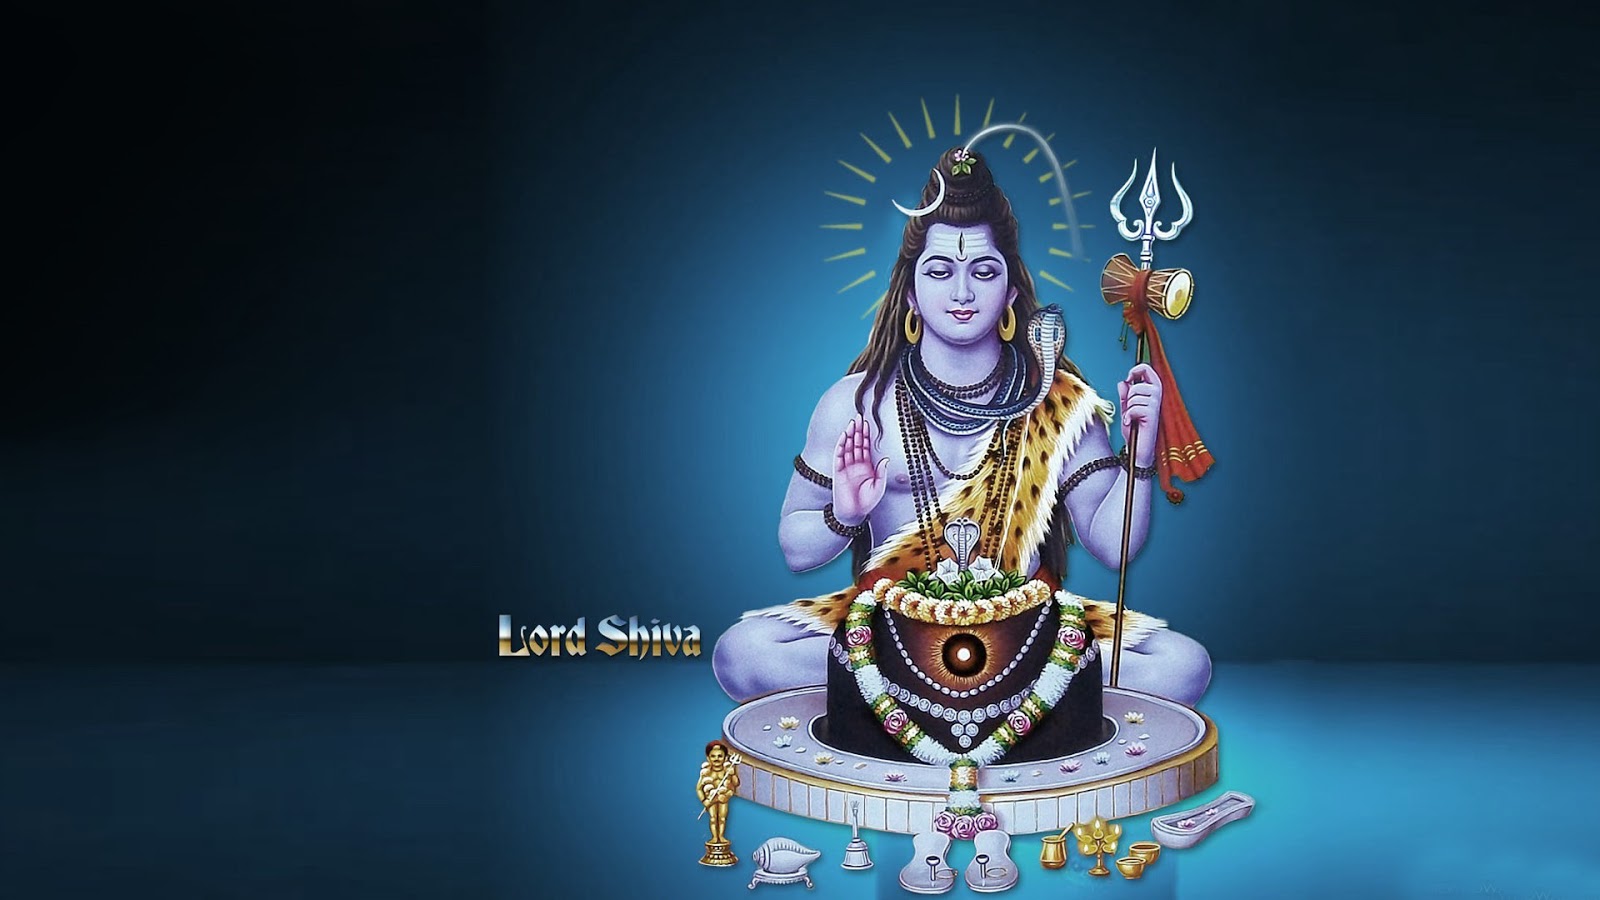 God-Shiv-Wallpapers - All Hindu Gods wallpapers and pictures in hd.